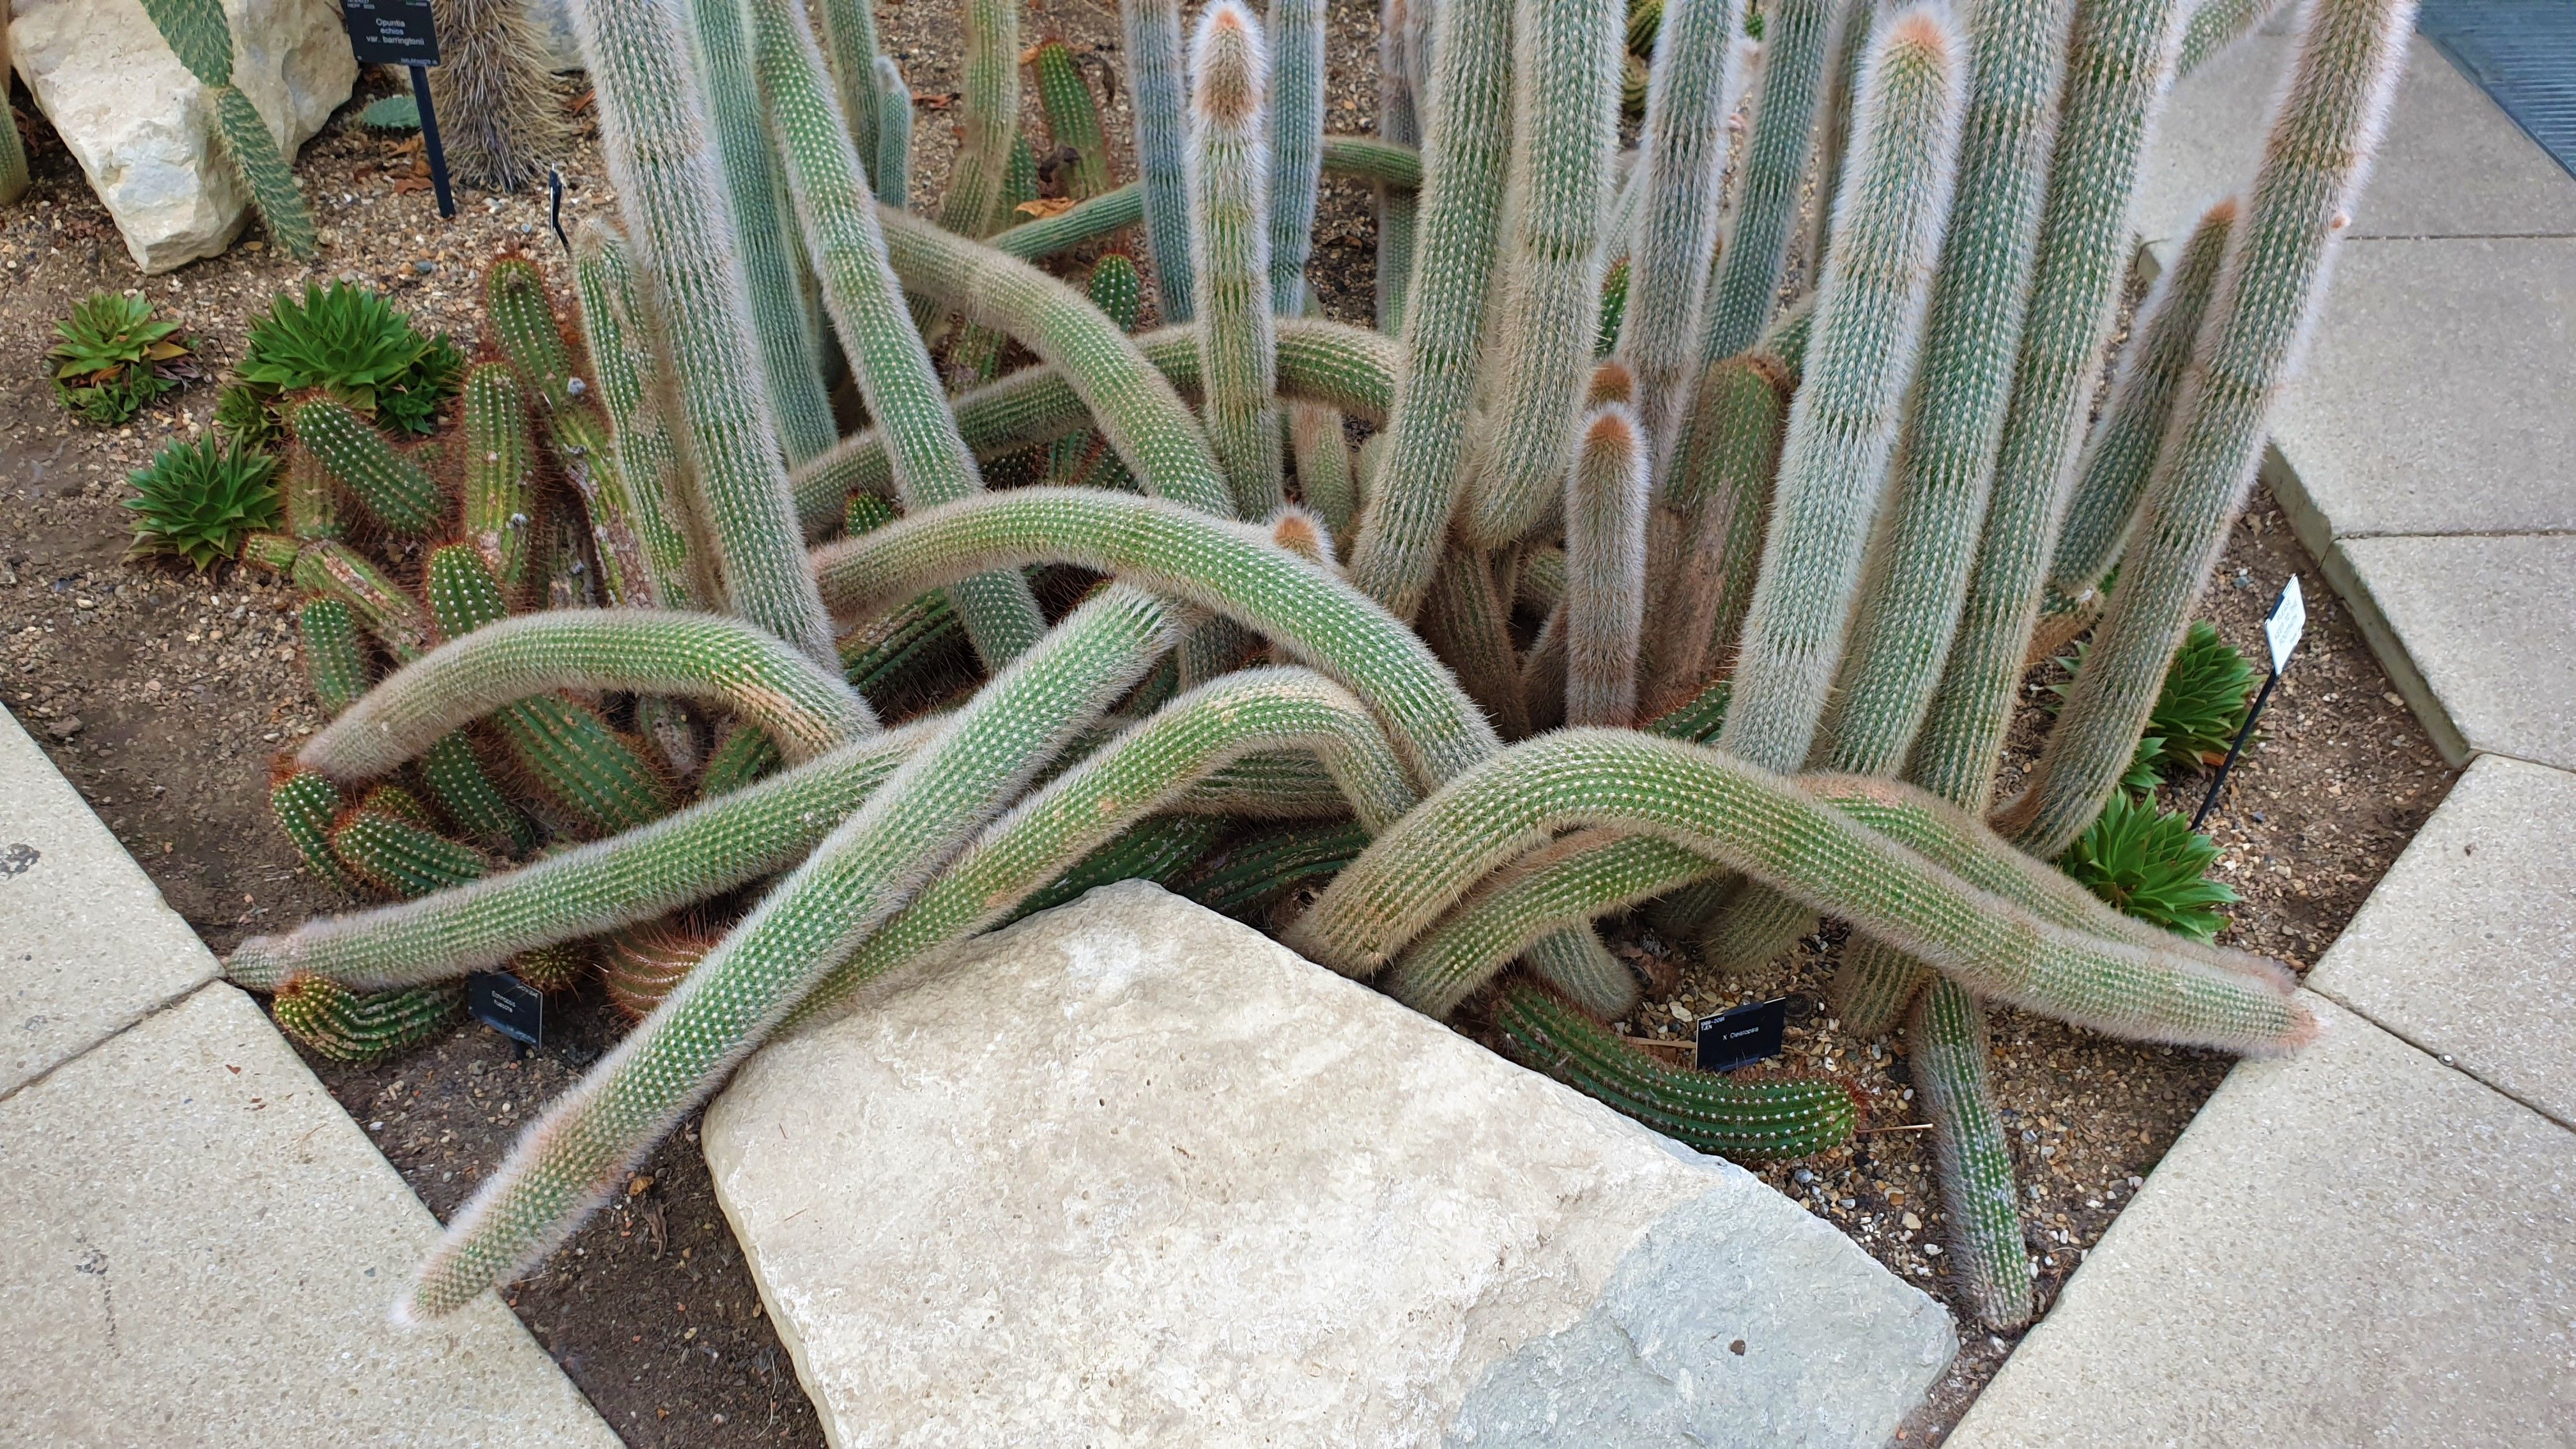 Snake-like cactus X Cleistopsis in Princess of Wales Conservatory